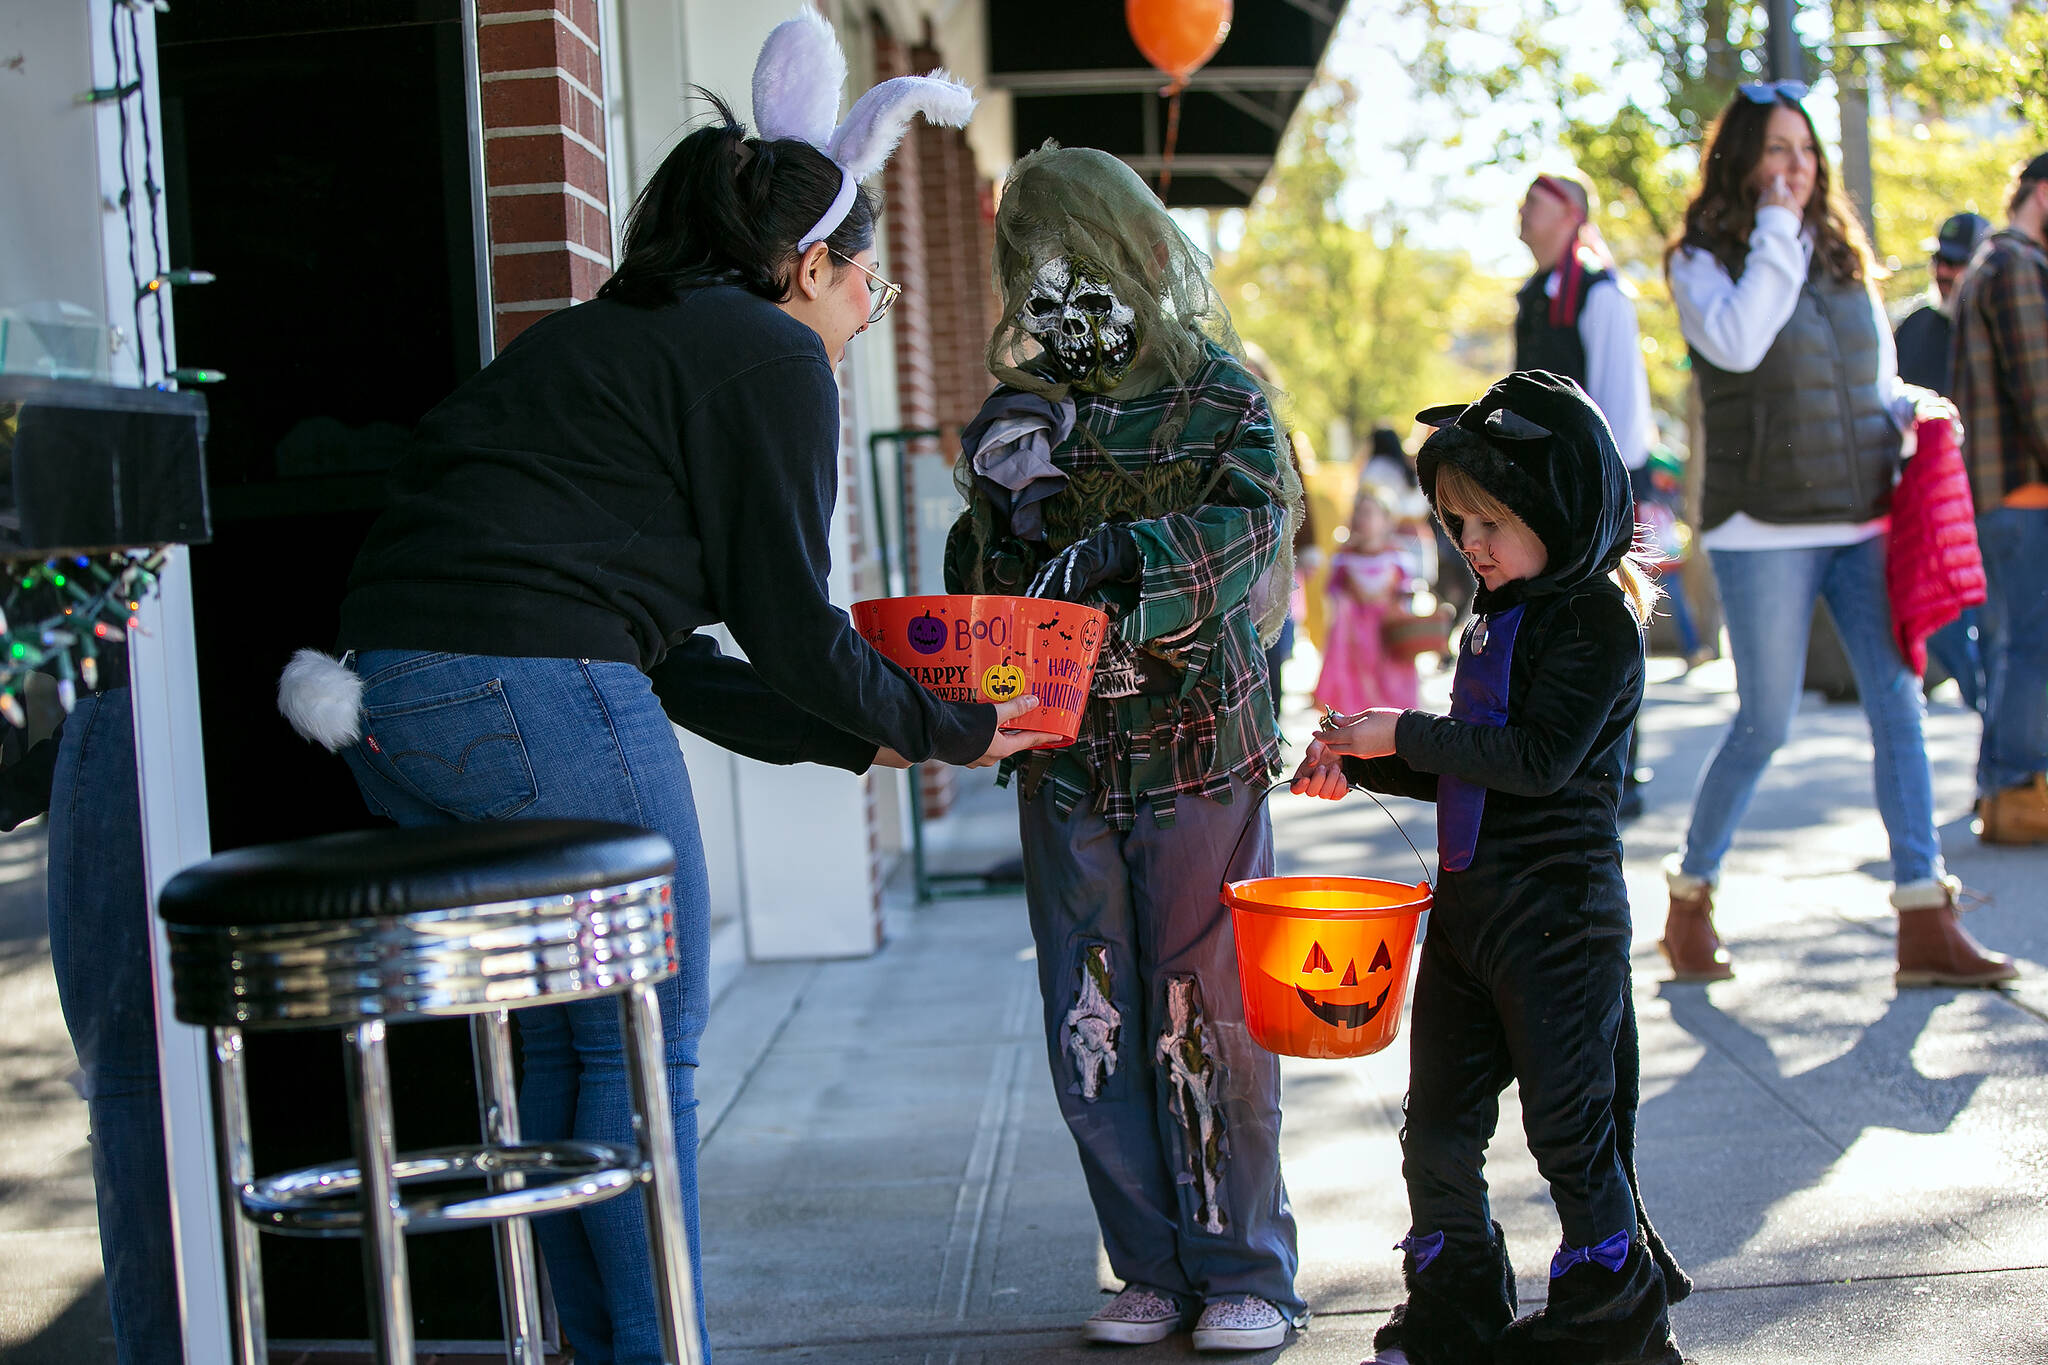 Angus Reid Institute’s latest poll says 54 per cent of Canadians believe there are fewer kids trick-or-treating in their neighbourhood compared to a decade ago. Dinah Zengilou from Botan Ramen n’ Bar hands out candy during Downtown Everett Association’s trick-or-treat event Saturday, Oct. 28, 2023, in Everett, Washington. (Ryan Berry/The Herald)